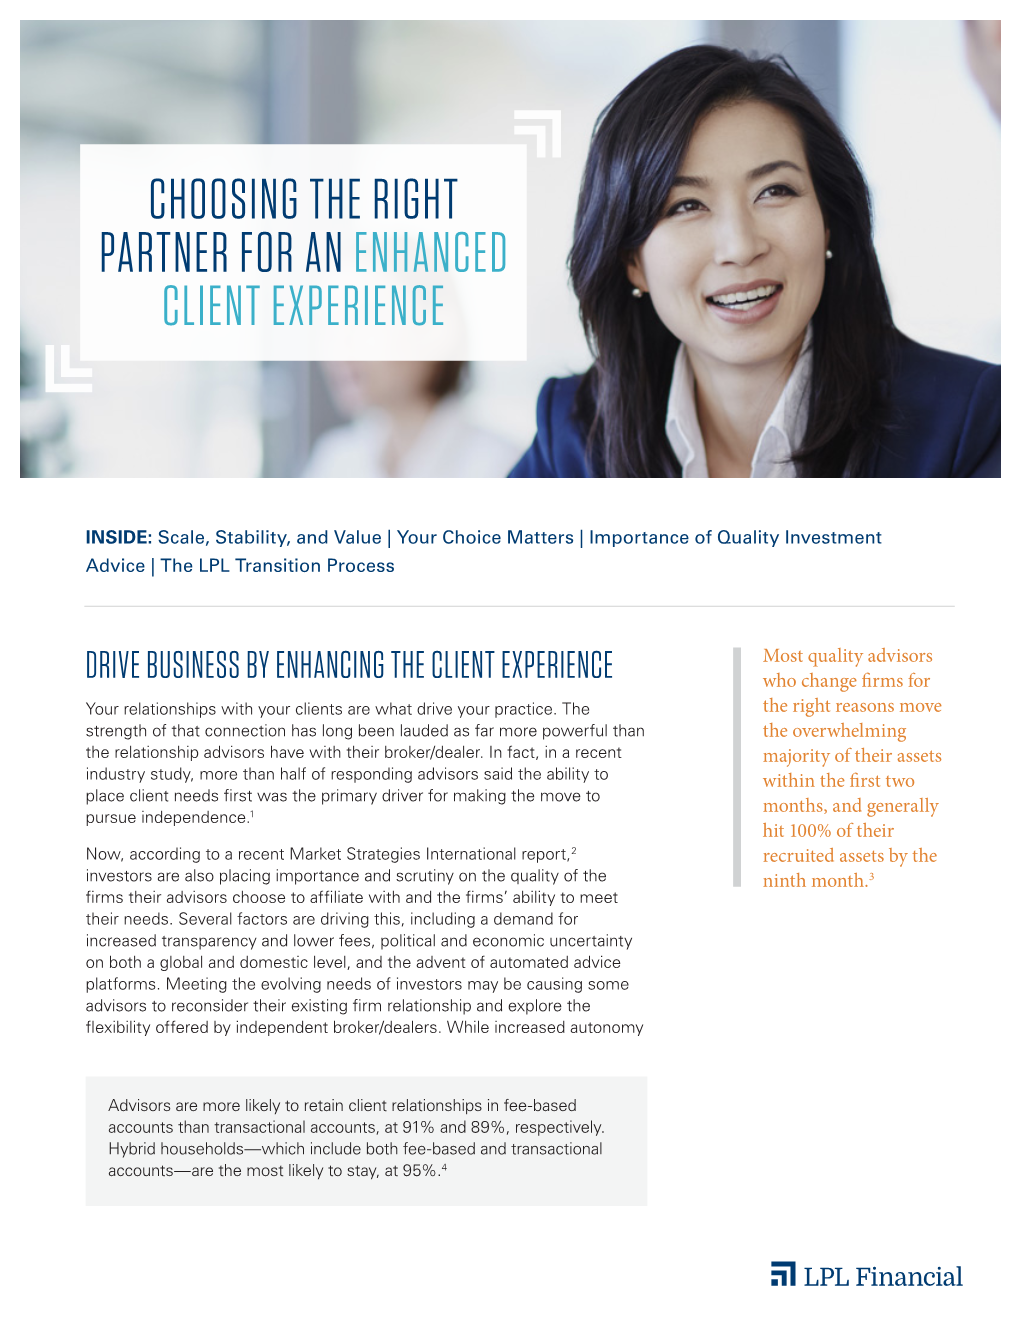 Choosing the Right Partner for an Enhanced Client Experience